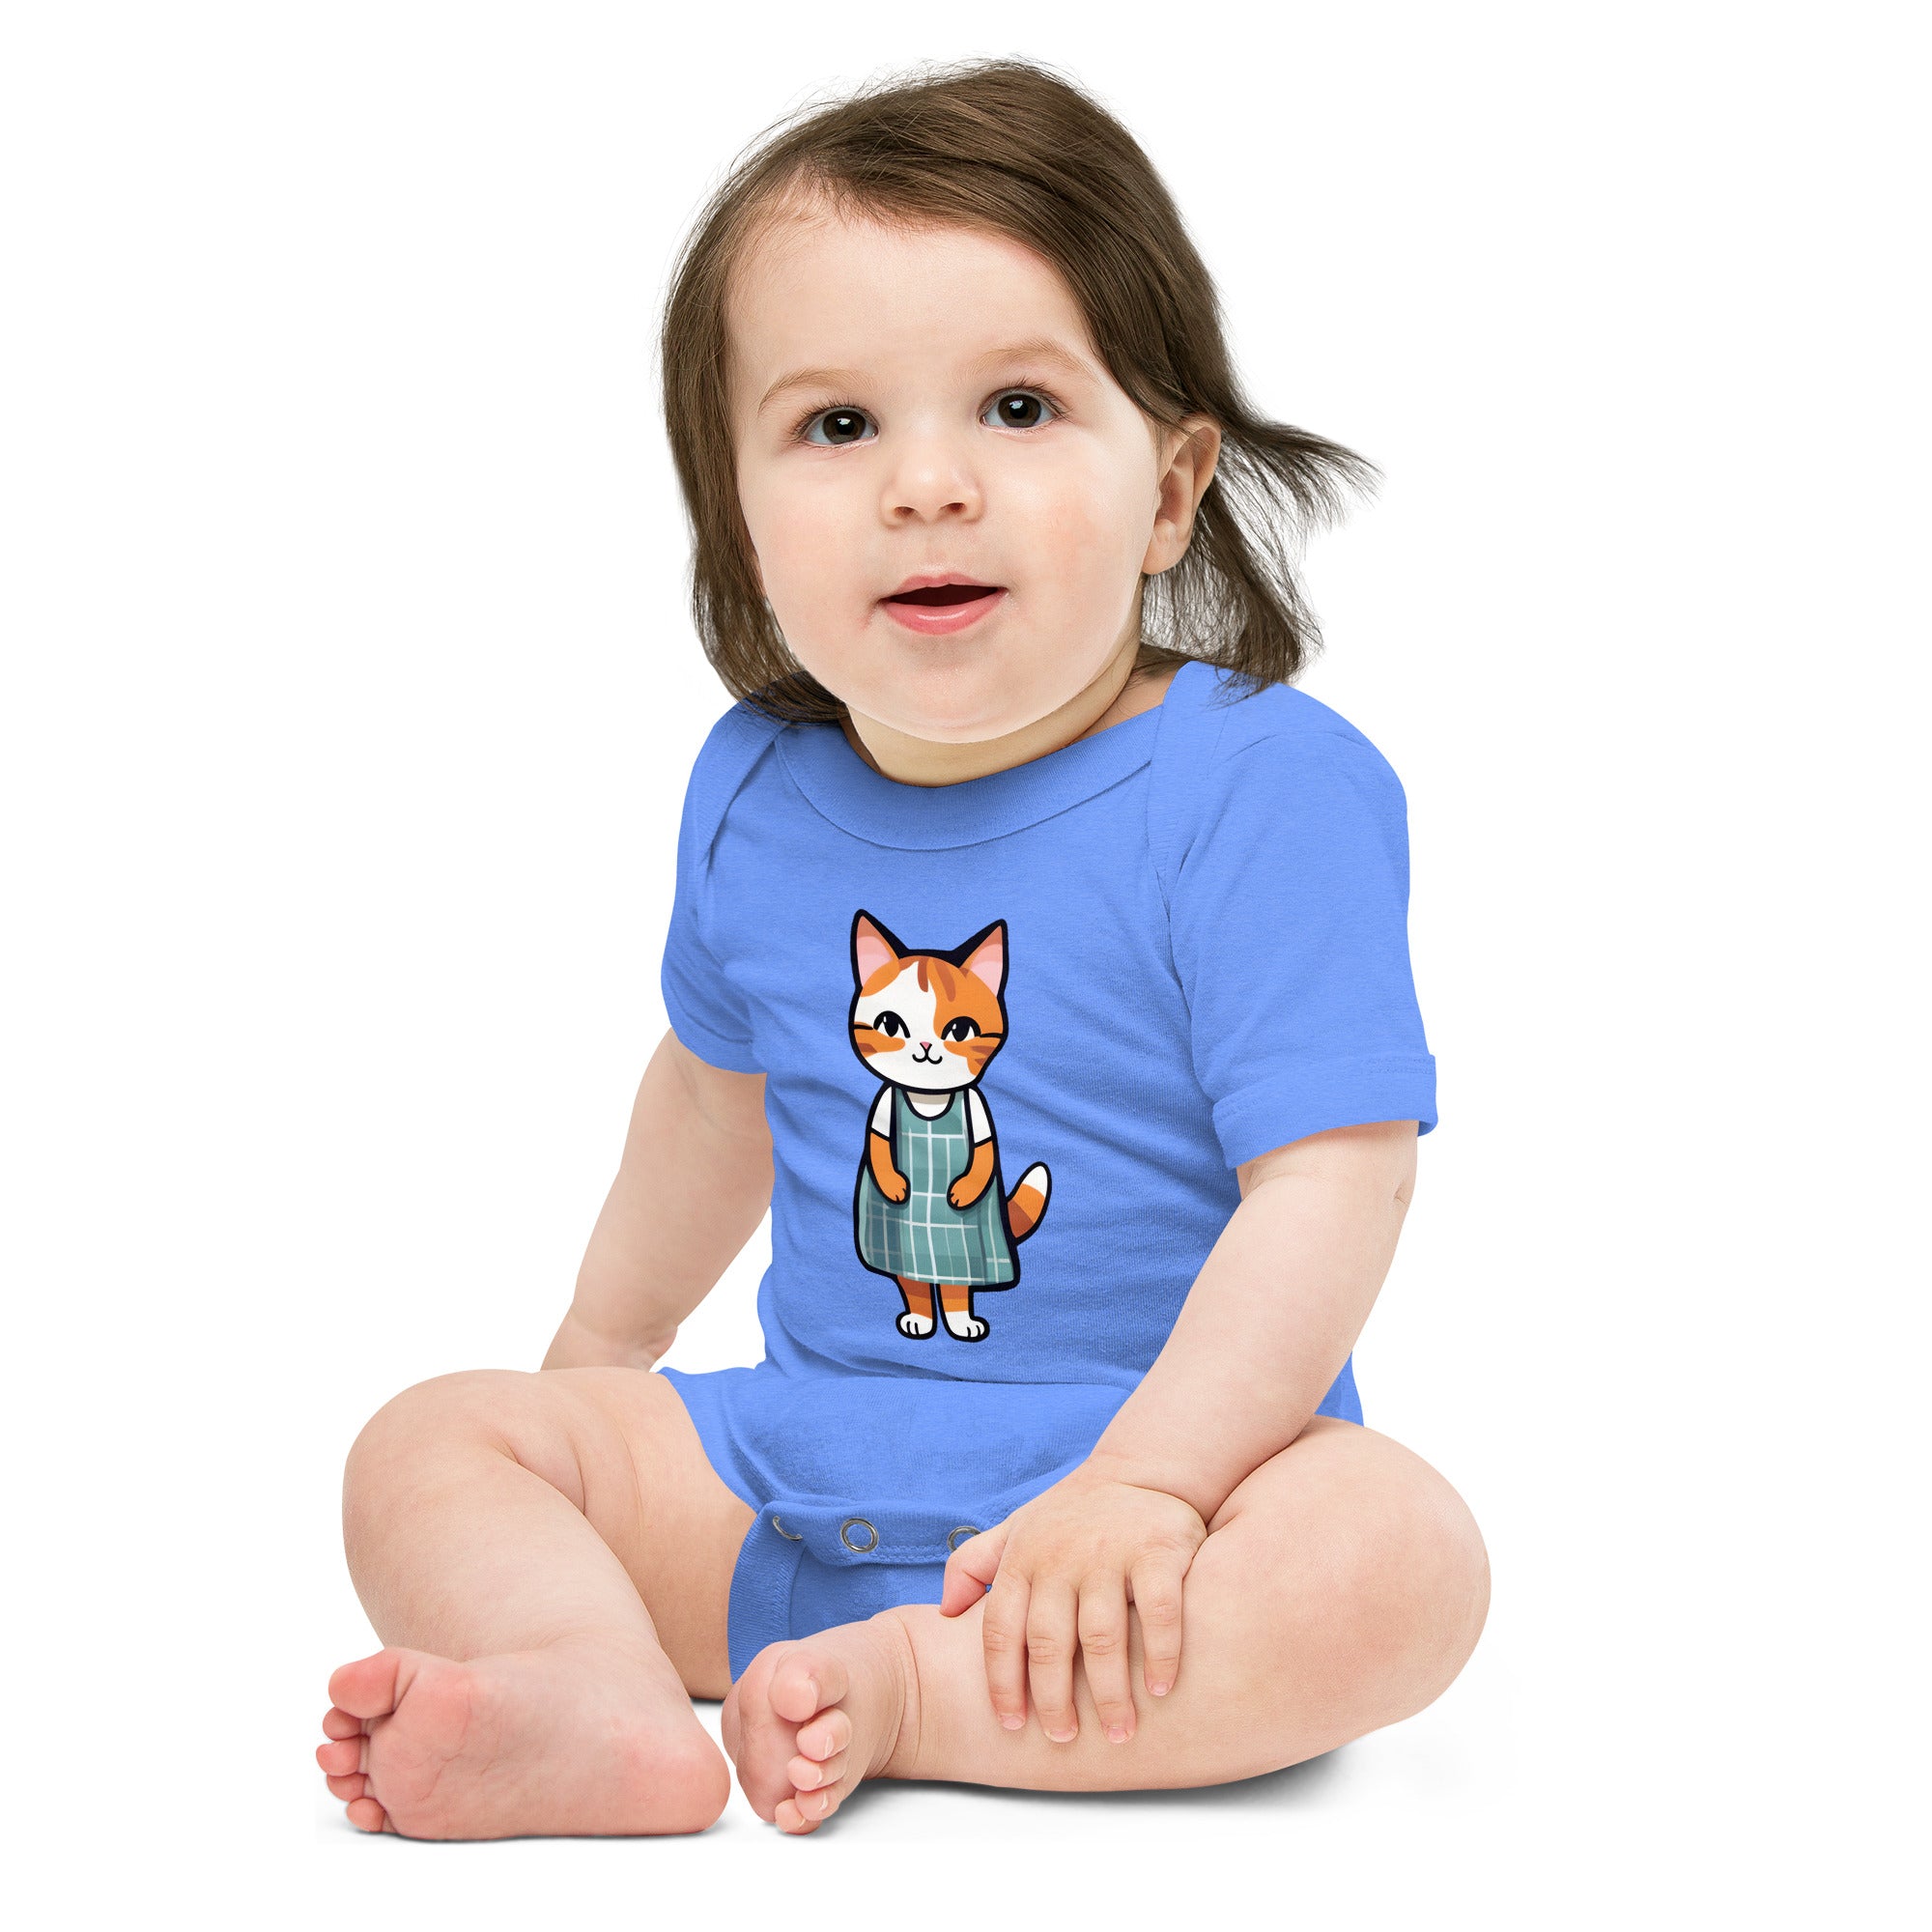 Cat in an Apron Dress Baby Short Sleeve One Piece